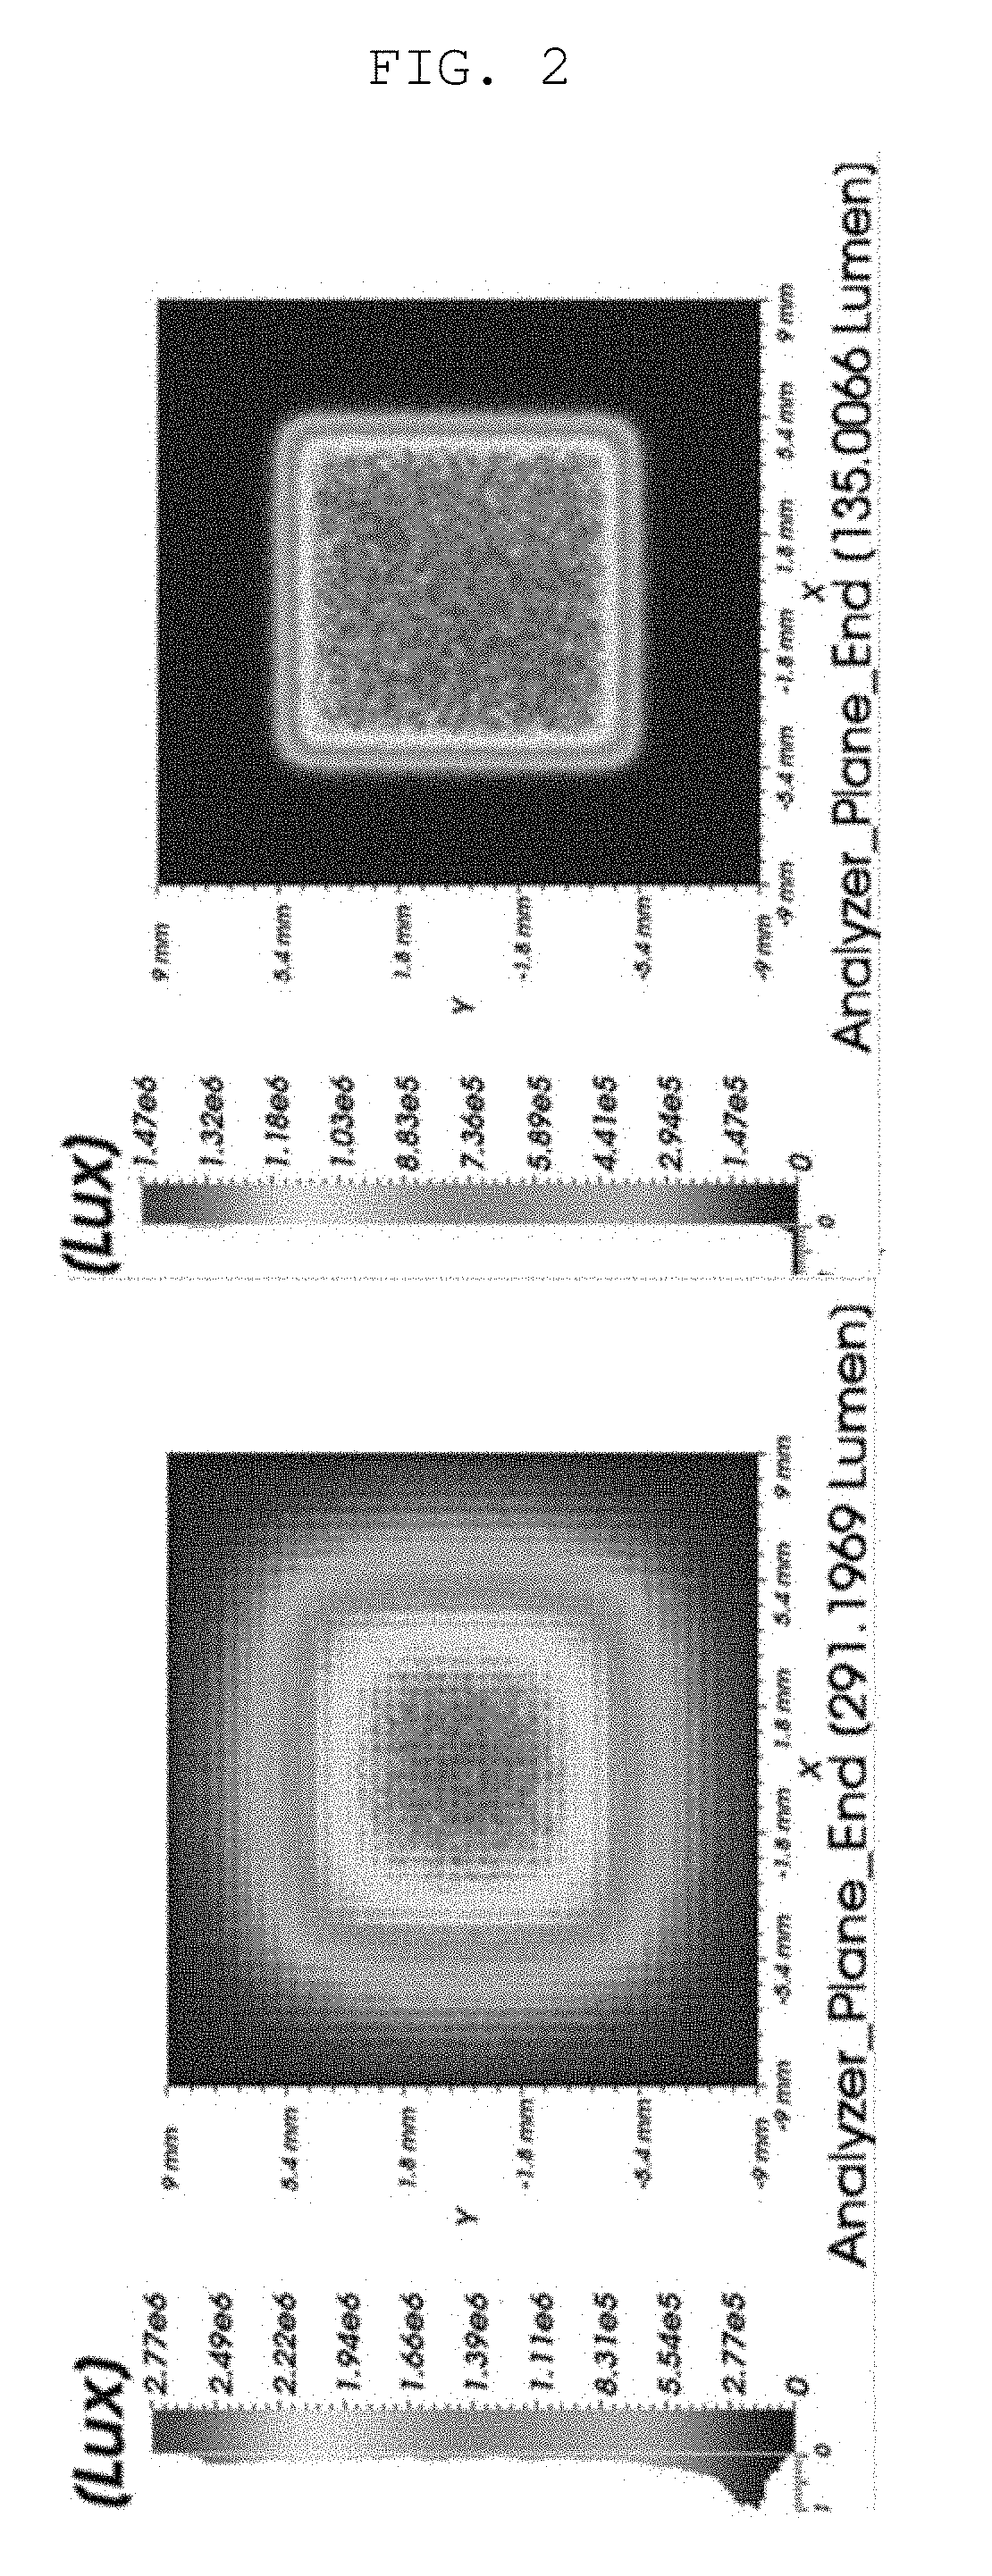 Substrate for color conversion, manufacturing method therefor, and display device comprising same